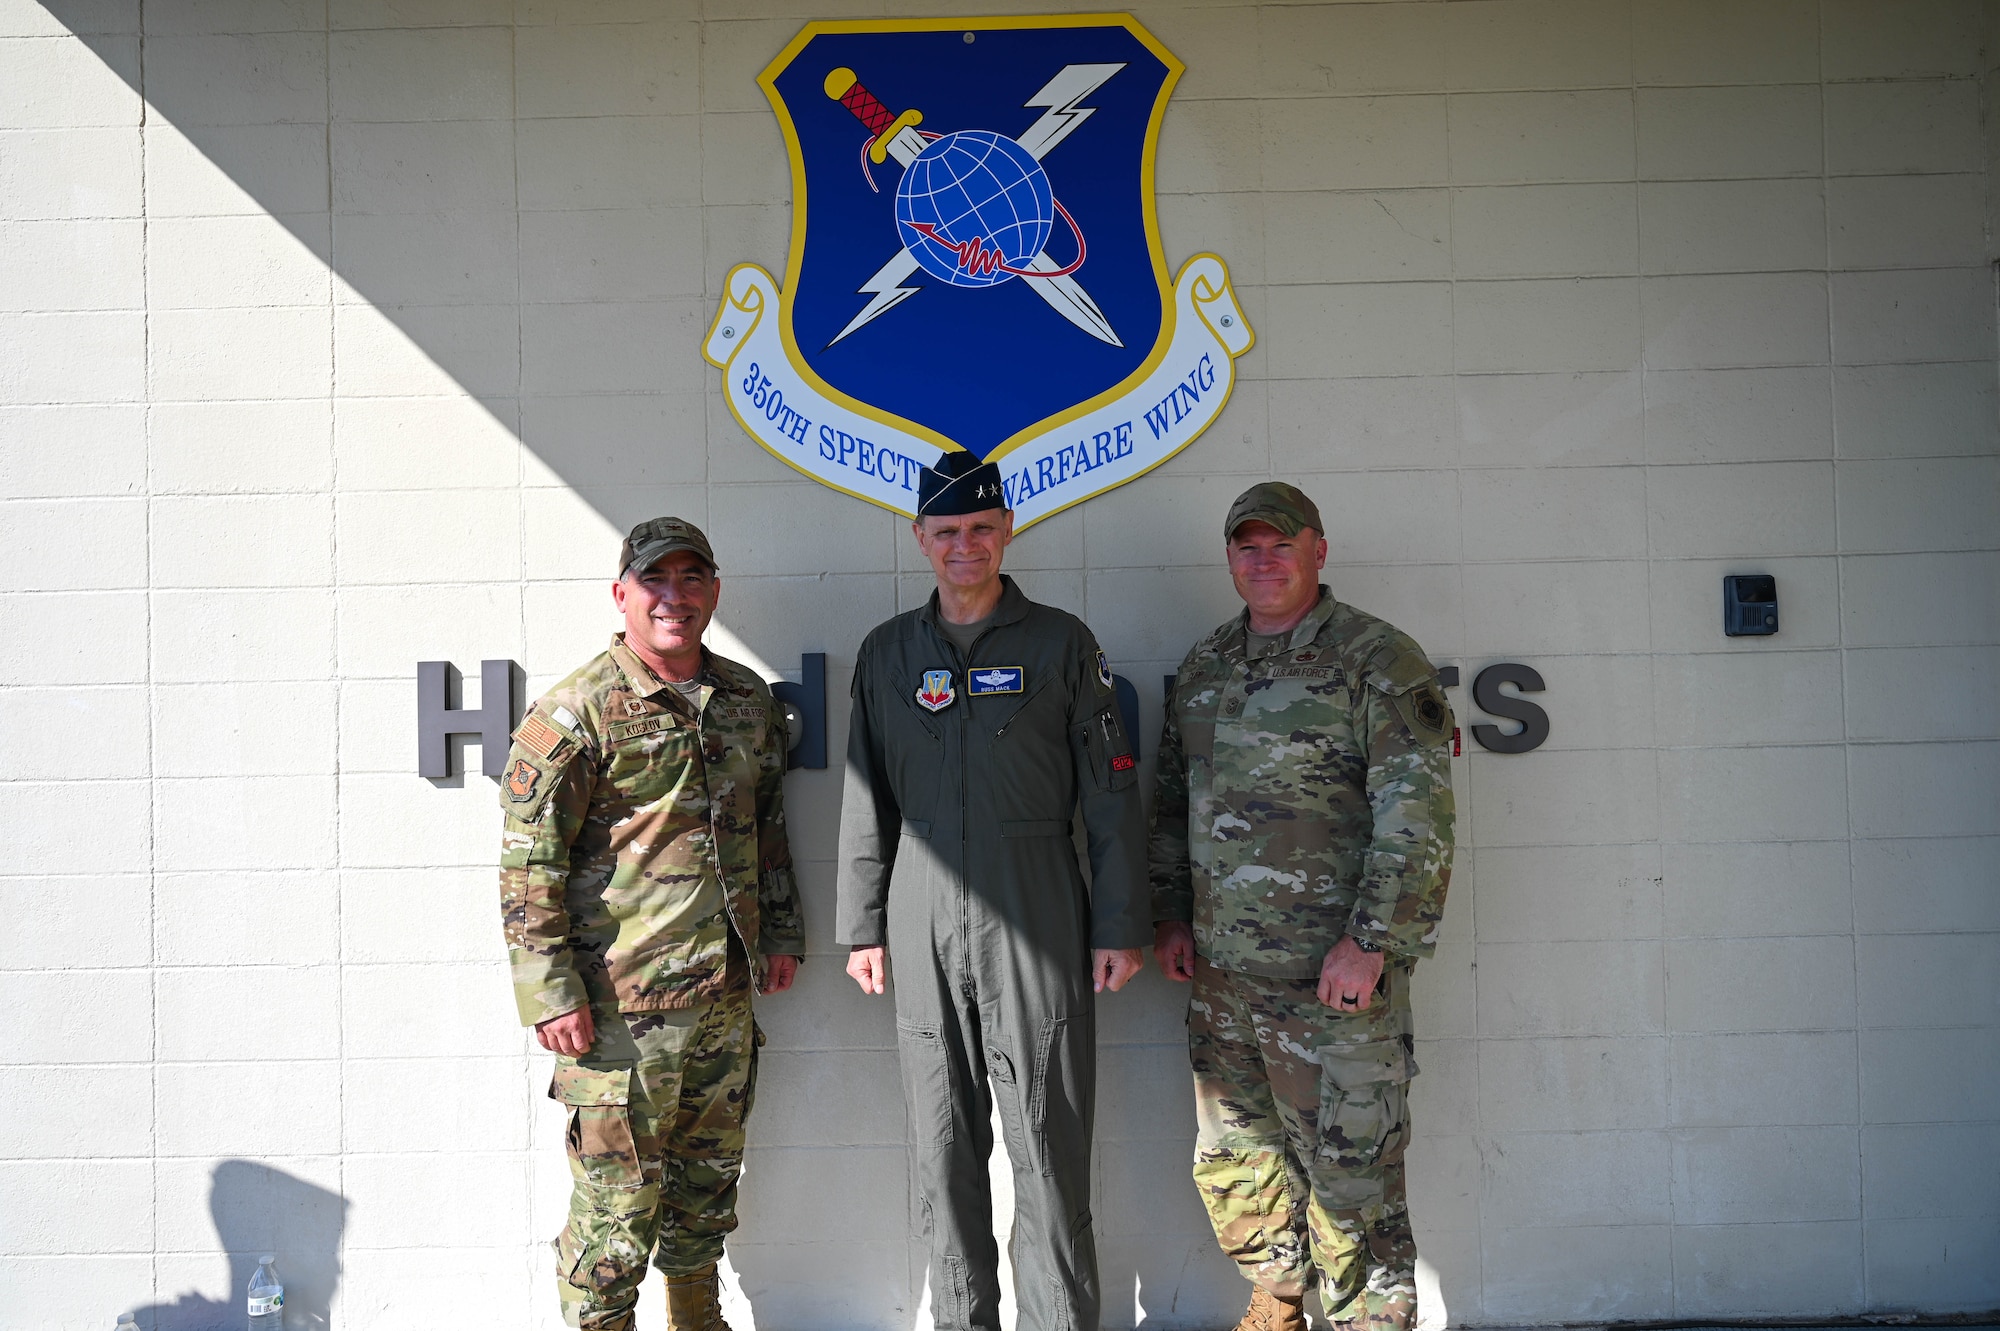 U.S. Air Force Lt. Gen. Russ Mack, deputy commander of Air Combat Command, center, Josh Koslov, 350th Spectrum Warfare Wing commander, left, and Chief Master Sgt. William Cupp, 350th SWW command chief, right, pose for a photo following a wing visit at Eglin Air Force Base, Fla., Sept. 6, 2023. The  mission of the 350th SWW is to deliver adaptive and cutting-edge electromagnetic spectrum capabilities that provide the warfighter a tactical and strategic competitive advantage and freedom to attack, maneuver, and defend. (U.S. Air Force photo by Capt. Benjamin Aronson)